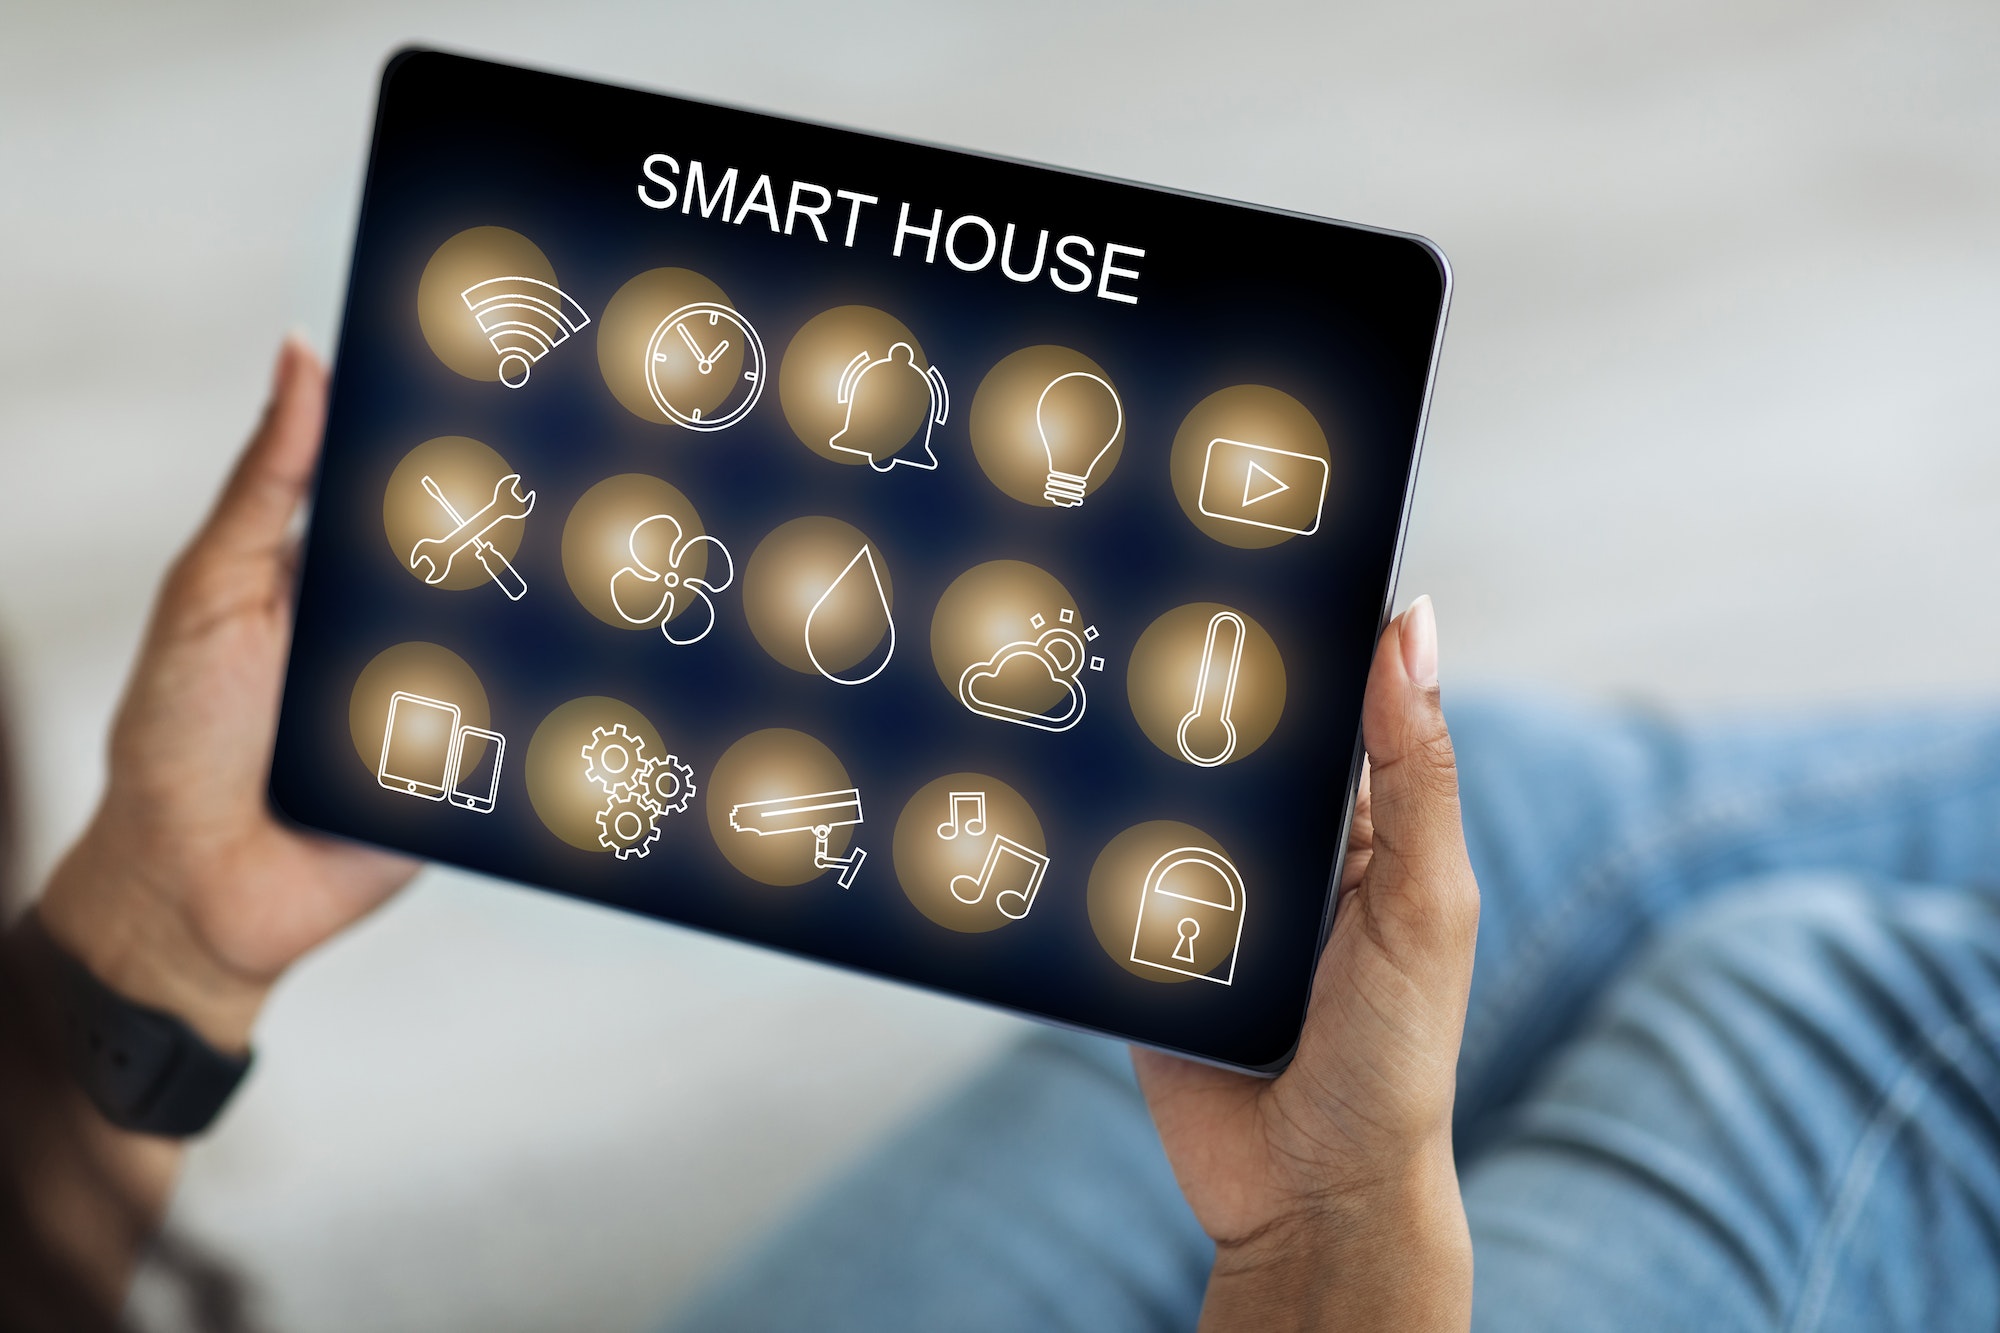 The latest technologies for a smart and connected home